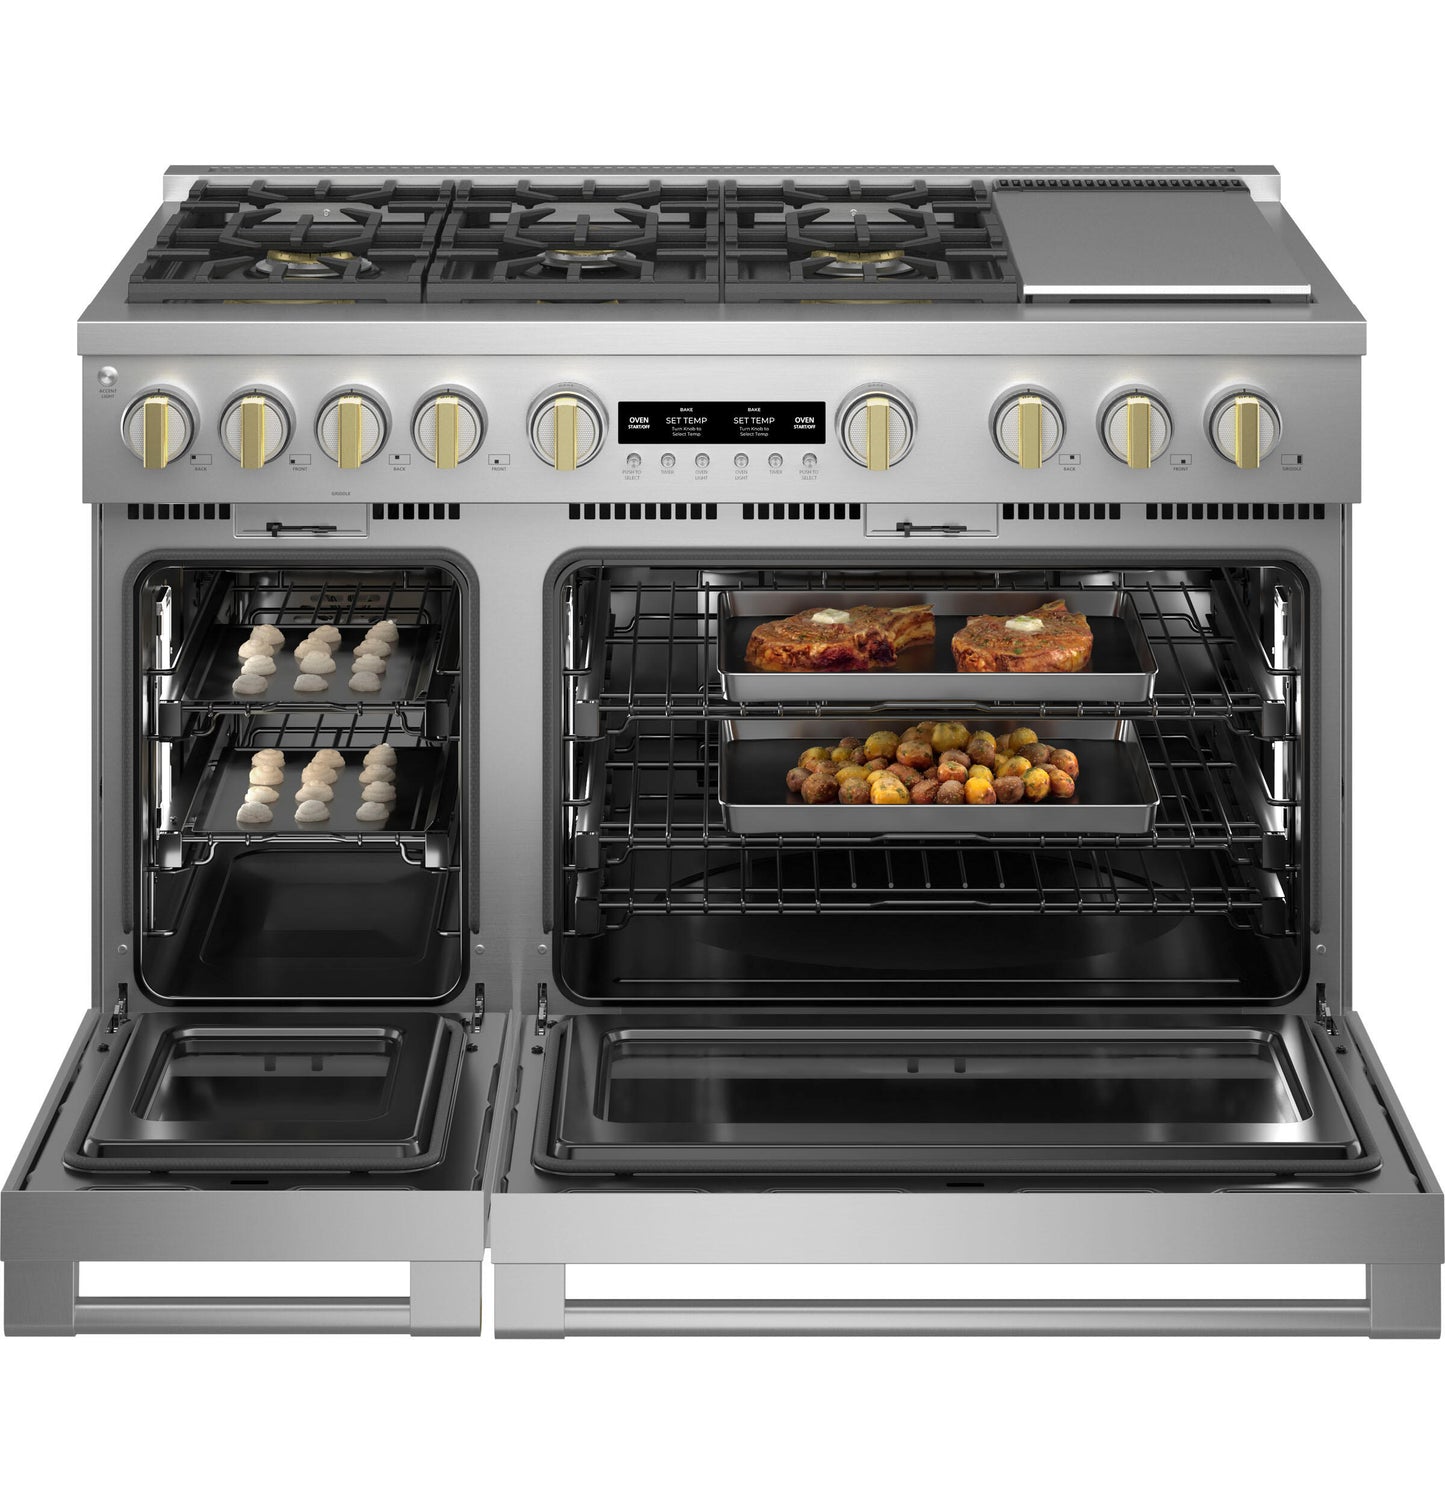 Monogram ZDP486NDTSS Monogram 48" Dual-Fuel Professional Range With 6 Burners And Griddle (Natural Gas)